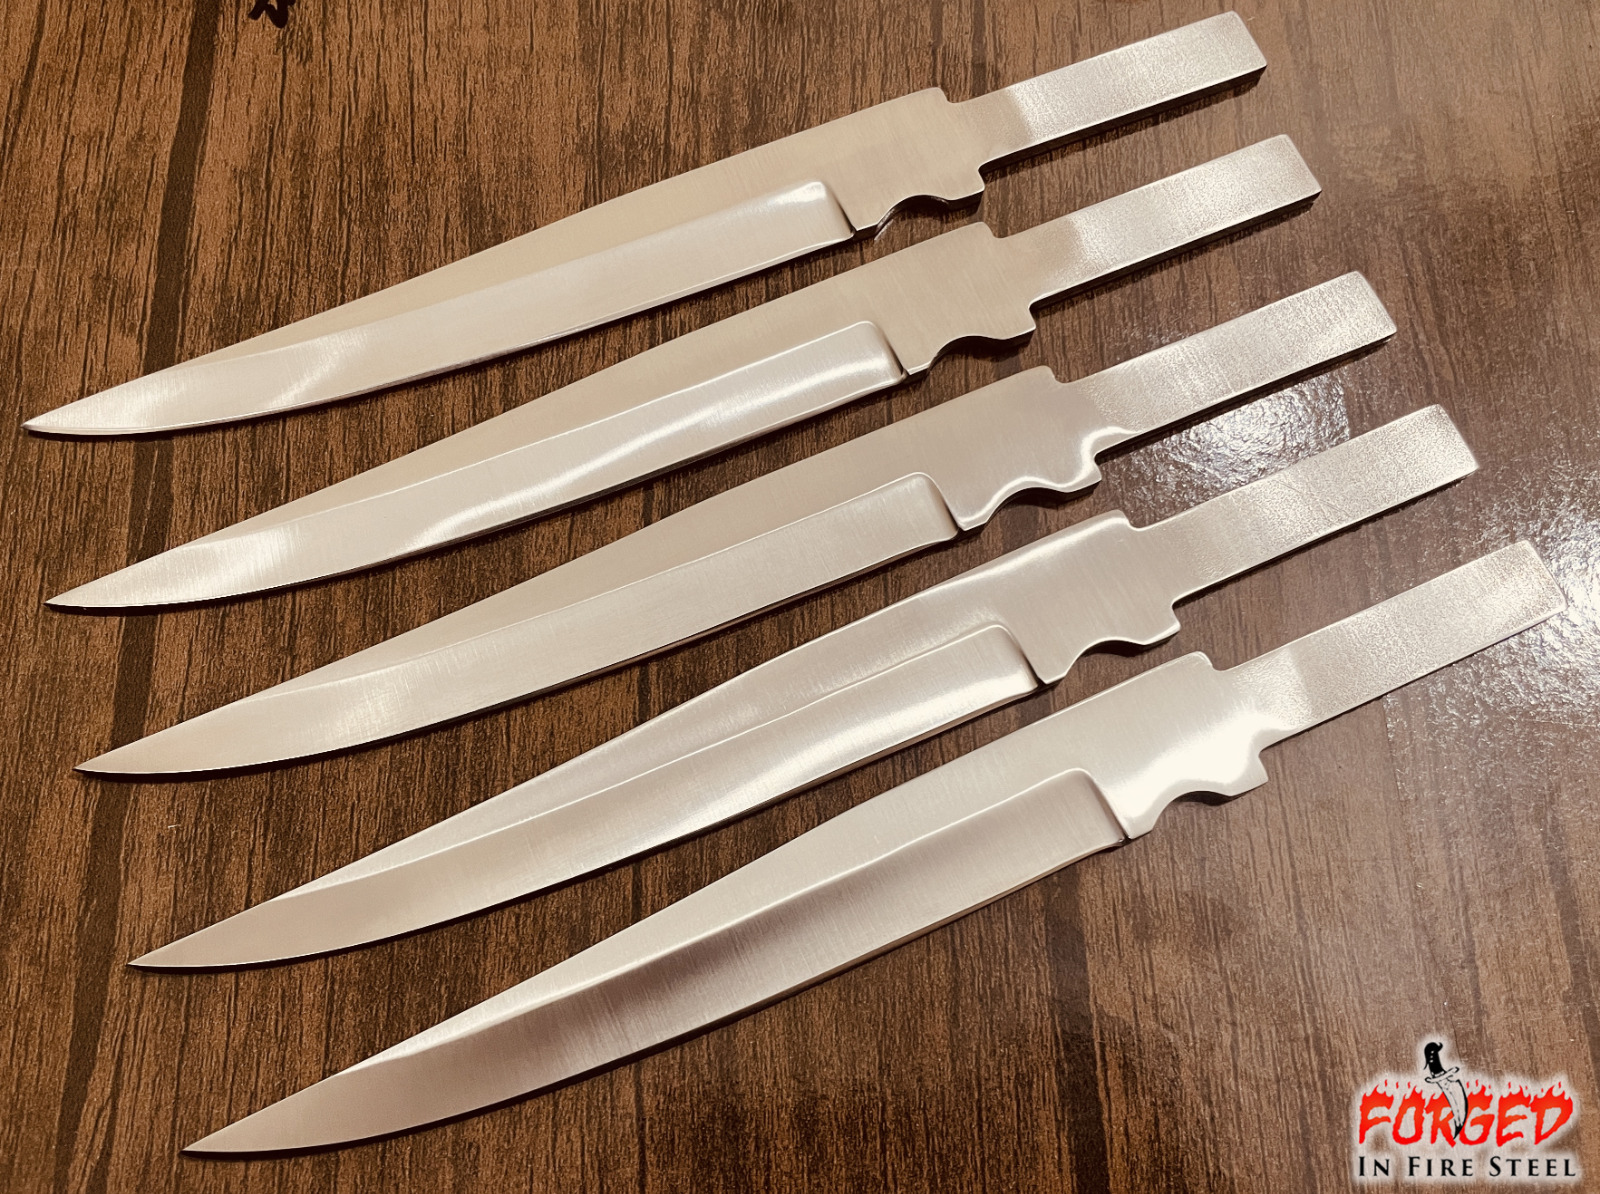 LOT OF 5PCS HUNTING KNIFE BLANK BLADES JAPANESE STAINLESS STEEL CAMPING HIKING